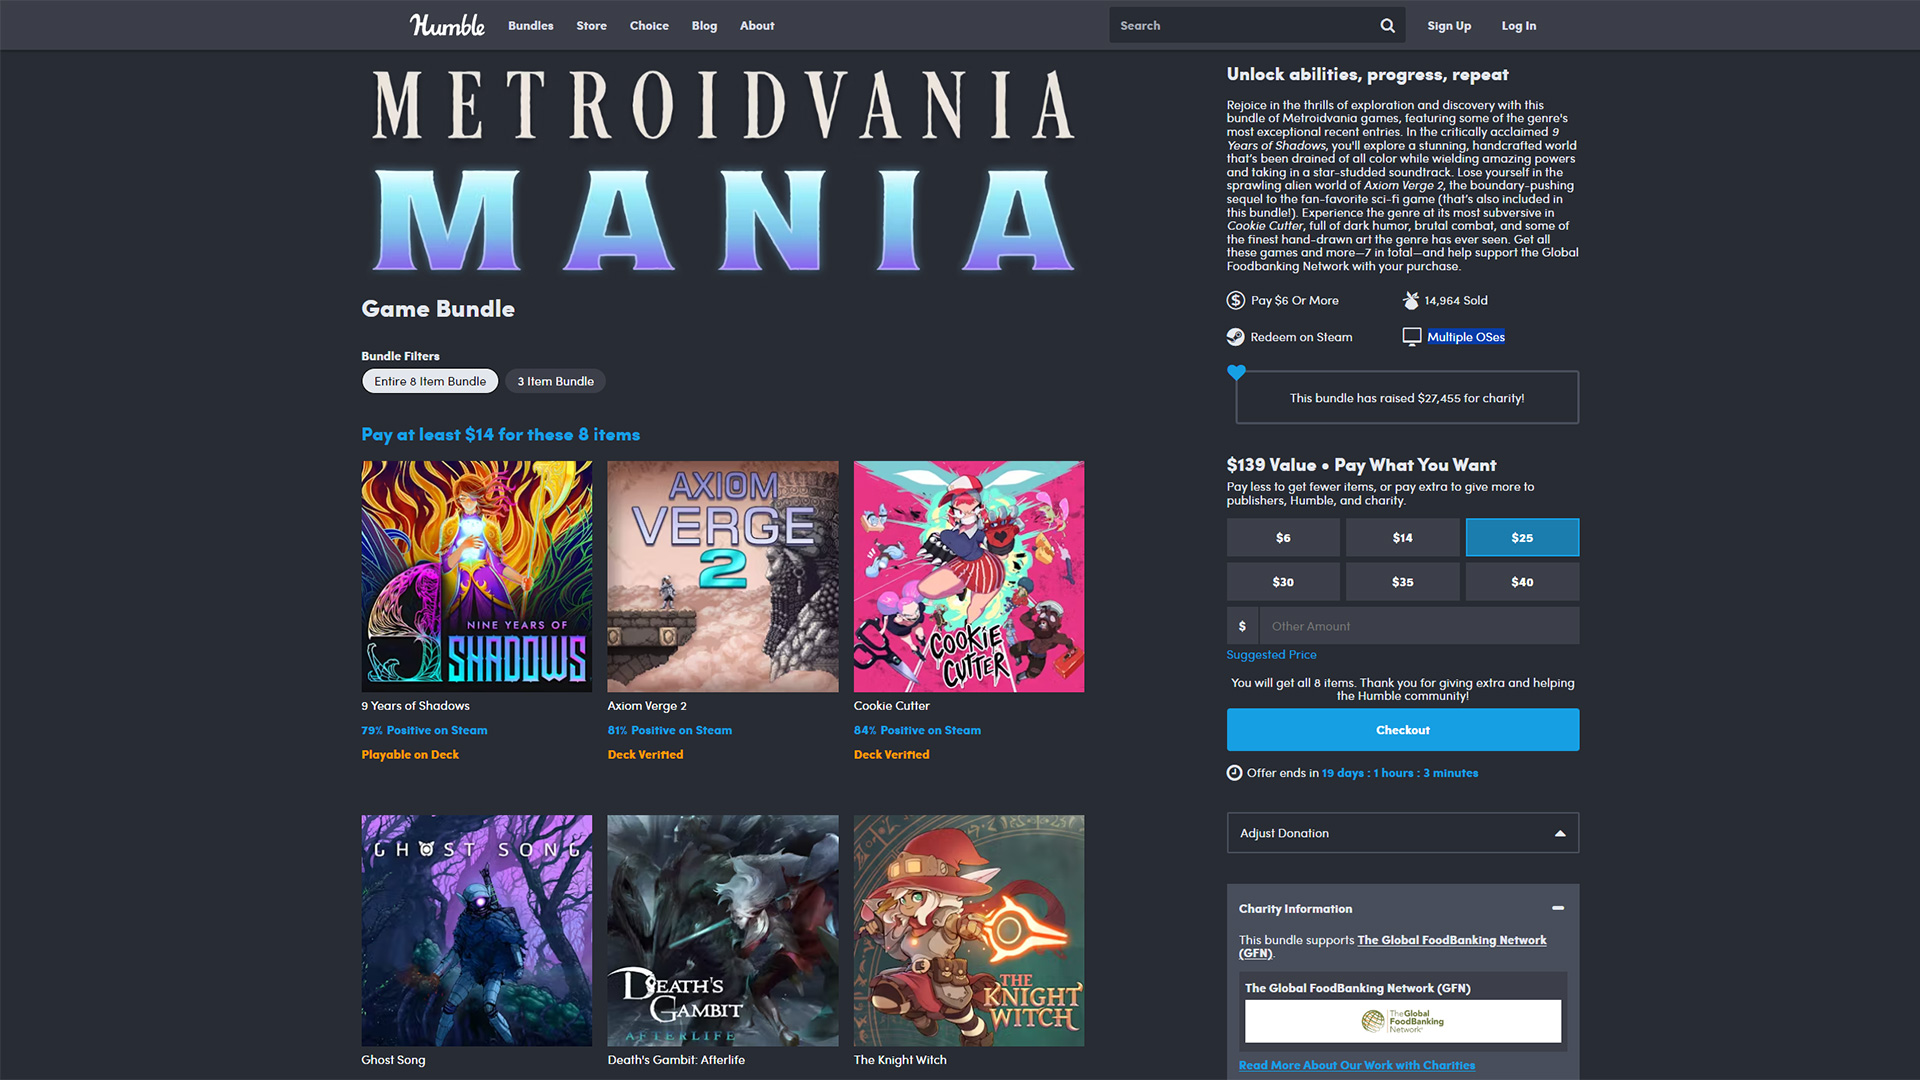 The Metroidvania Mania game bundle gets you eight items for $14